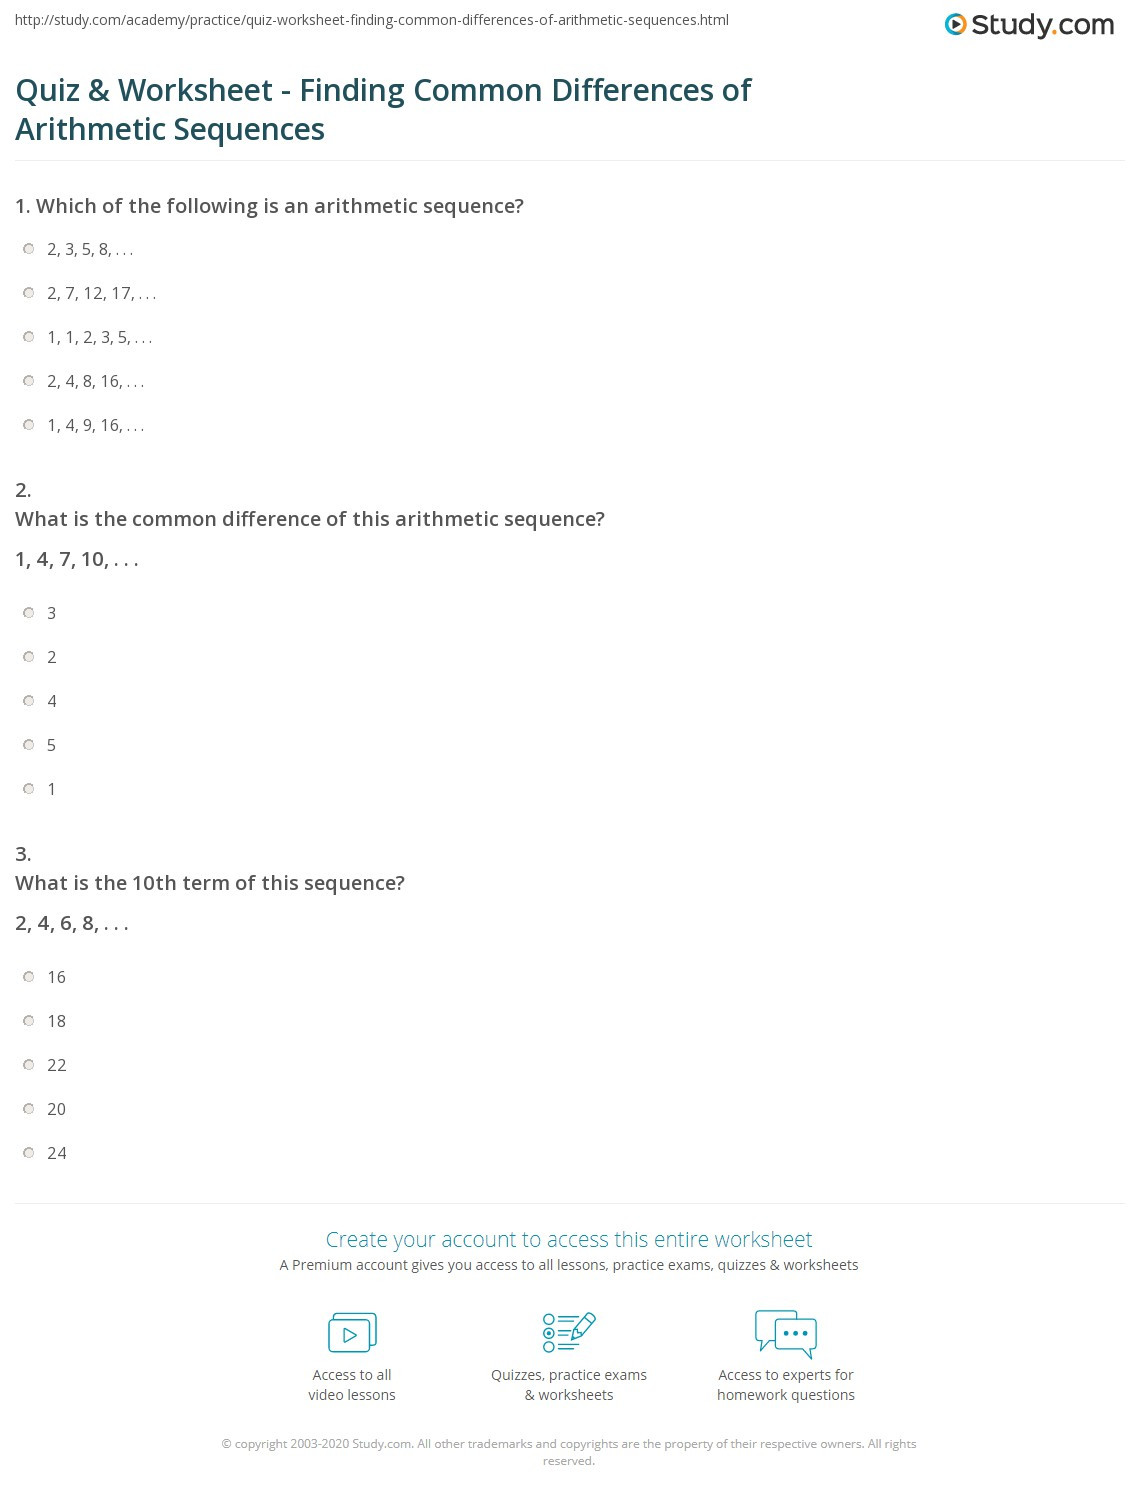 Arithmetic Sequences and Series Worksheet Quiz &amp; Worksheet Finding Mon Differences Of Arithmetic